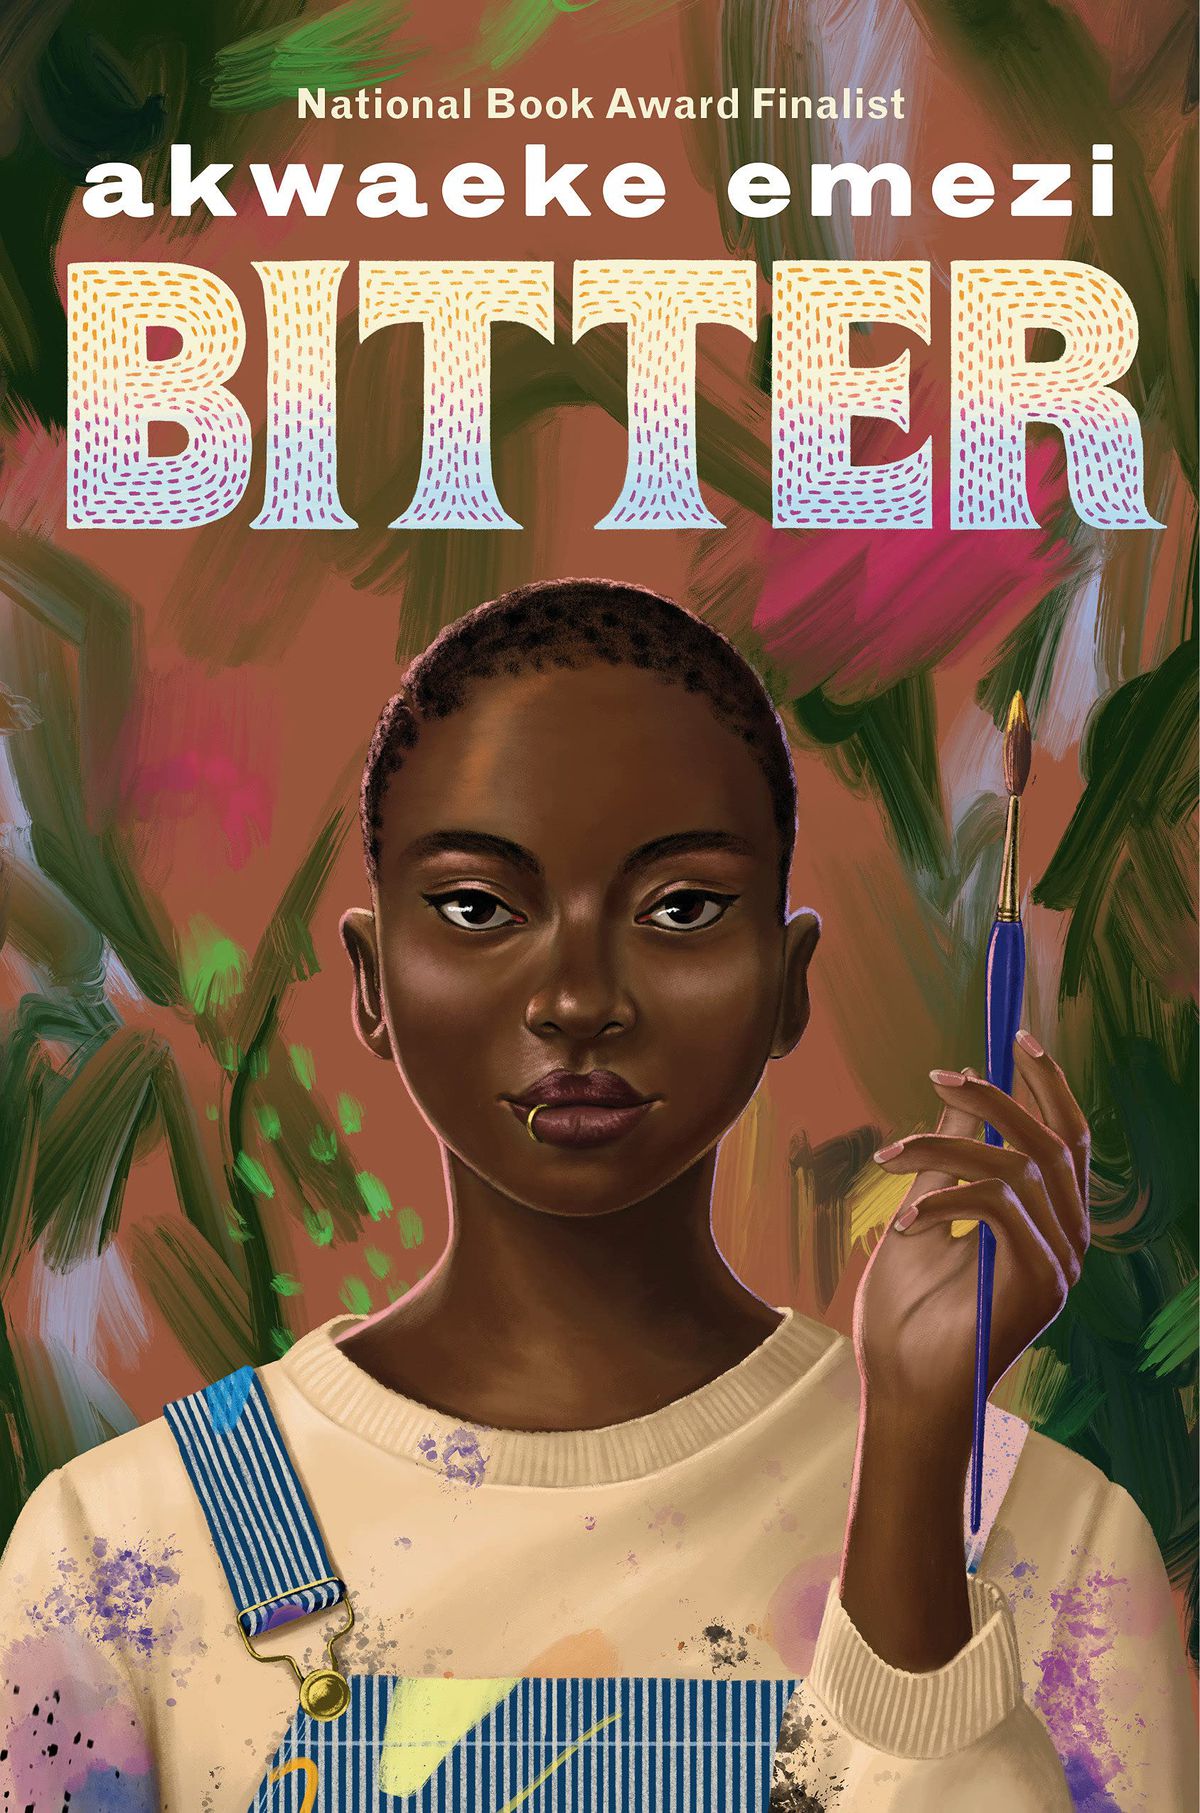 The cover for Bitter showing an illustration of a young Black woman holding a paint brush